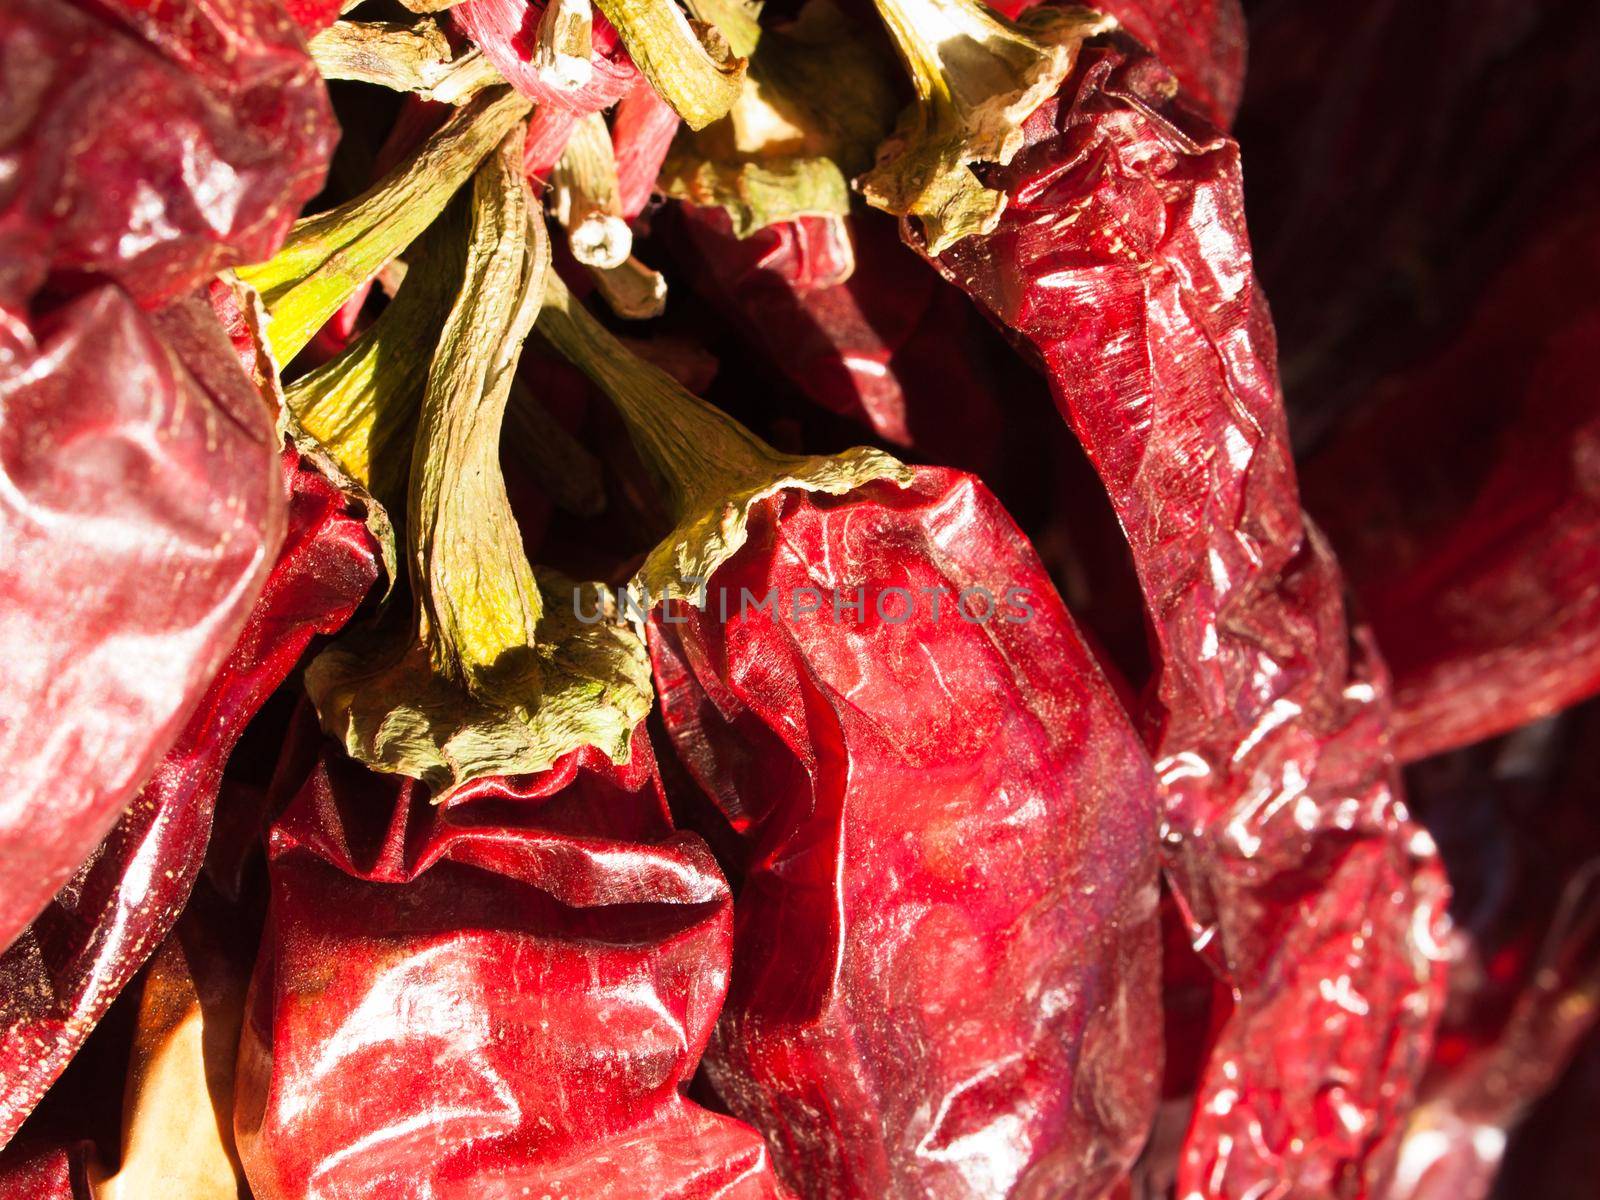 Dried red hot chili peppers. A staple of many Mexican dishes.